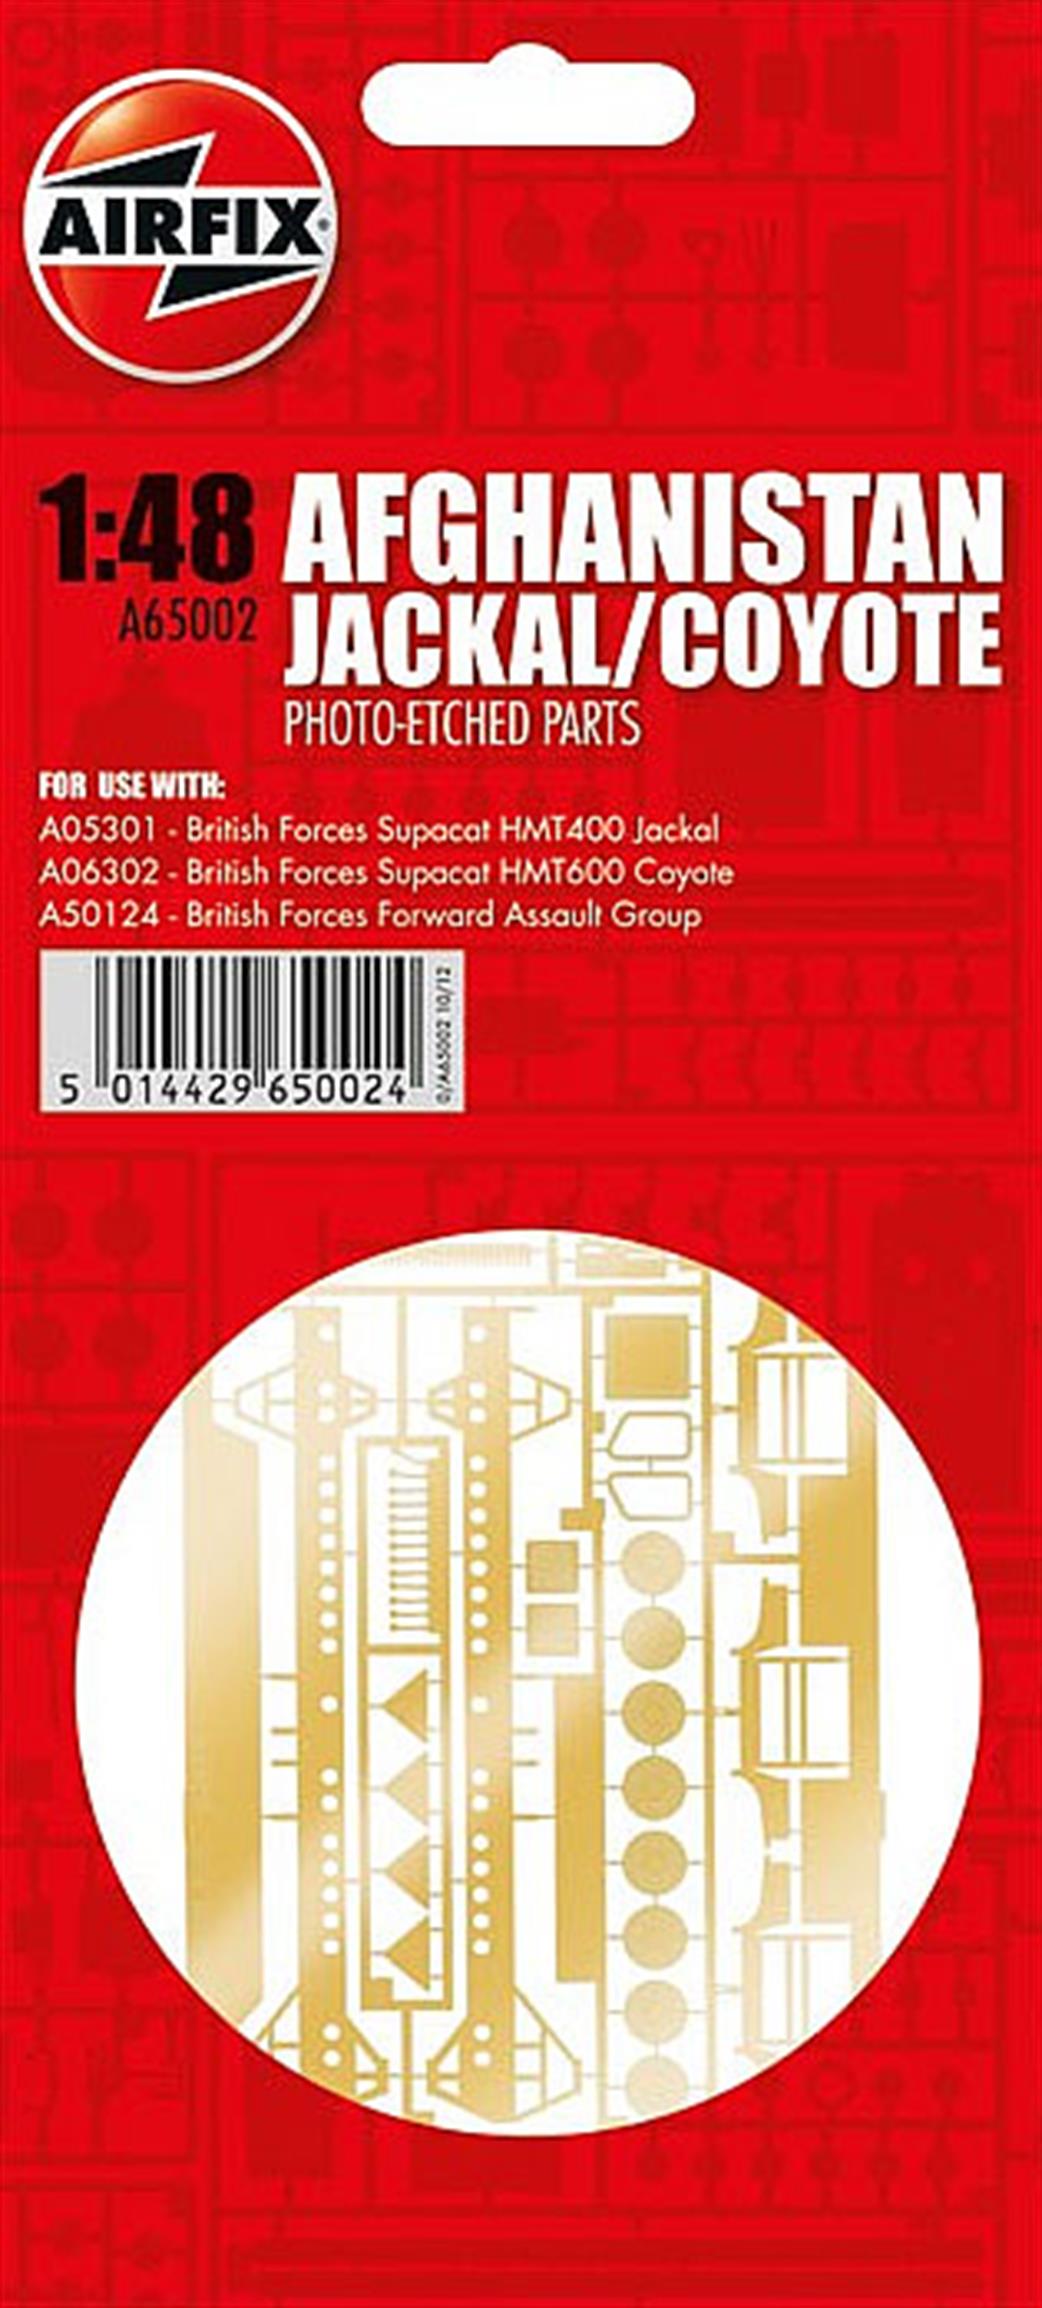 Airfix 1/48 A65002 British Forces Supercat Jackal and Coyote Photo Etched Parts